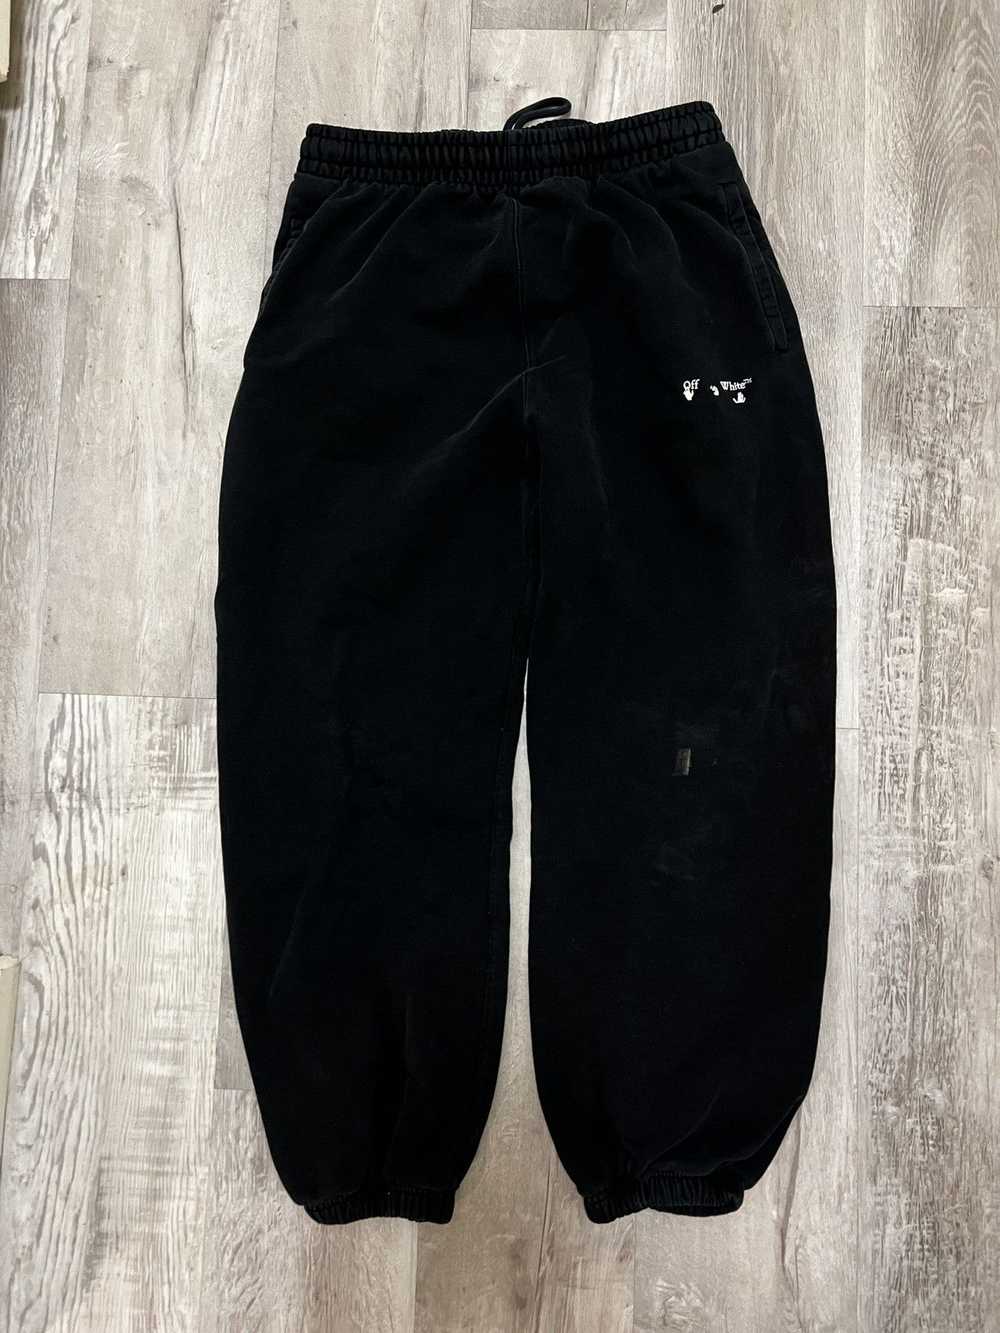 Off-White Off white womens sweatpants XL - image 8